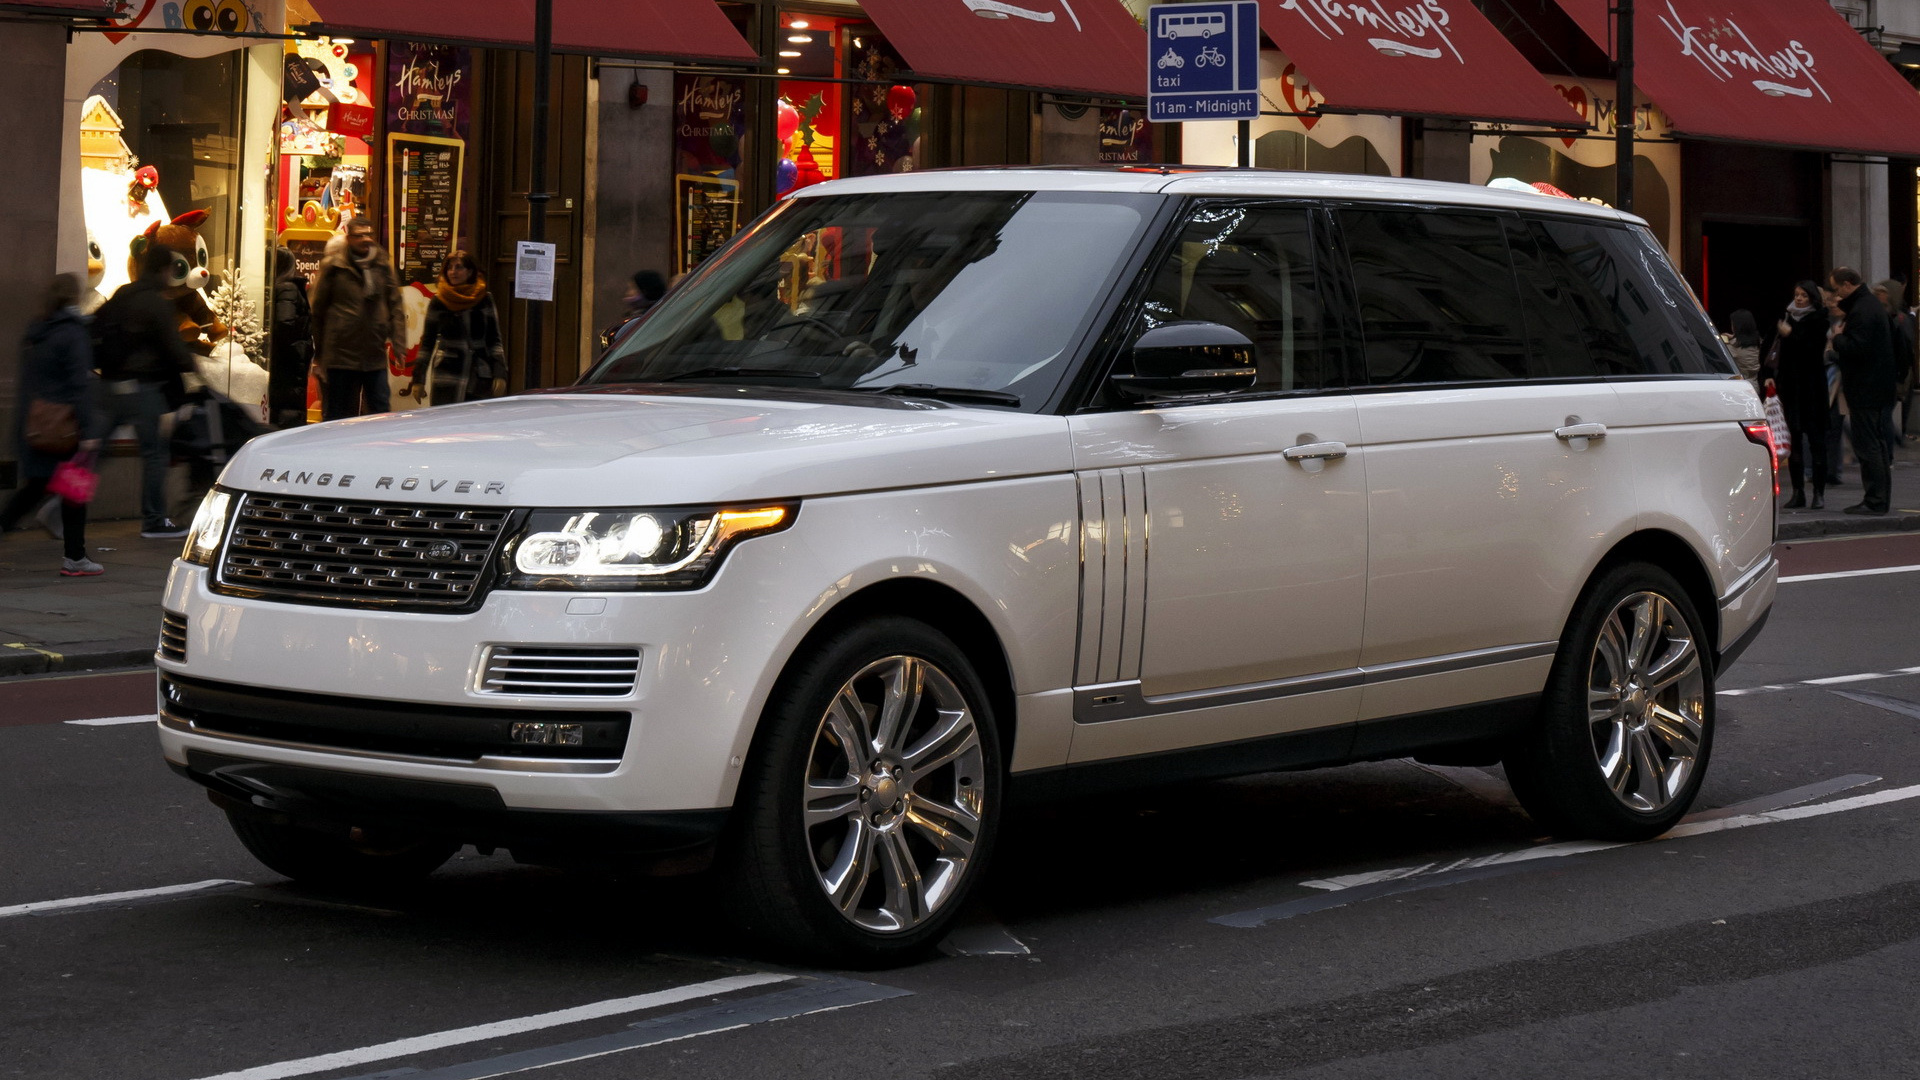 2014 Range Rover Autobiography Black [LWB] (UK) - Wallpapers and HD ...